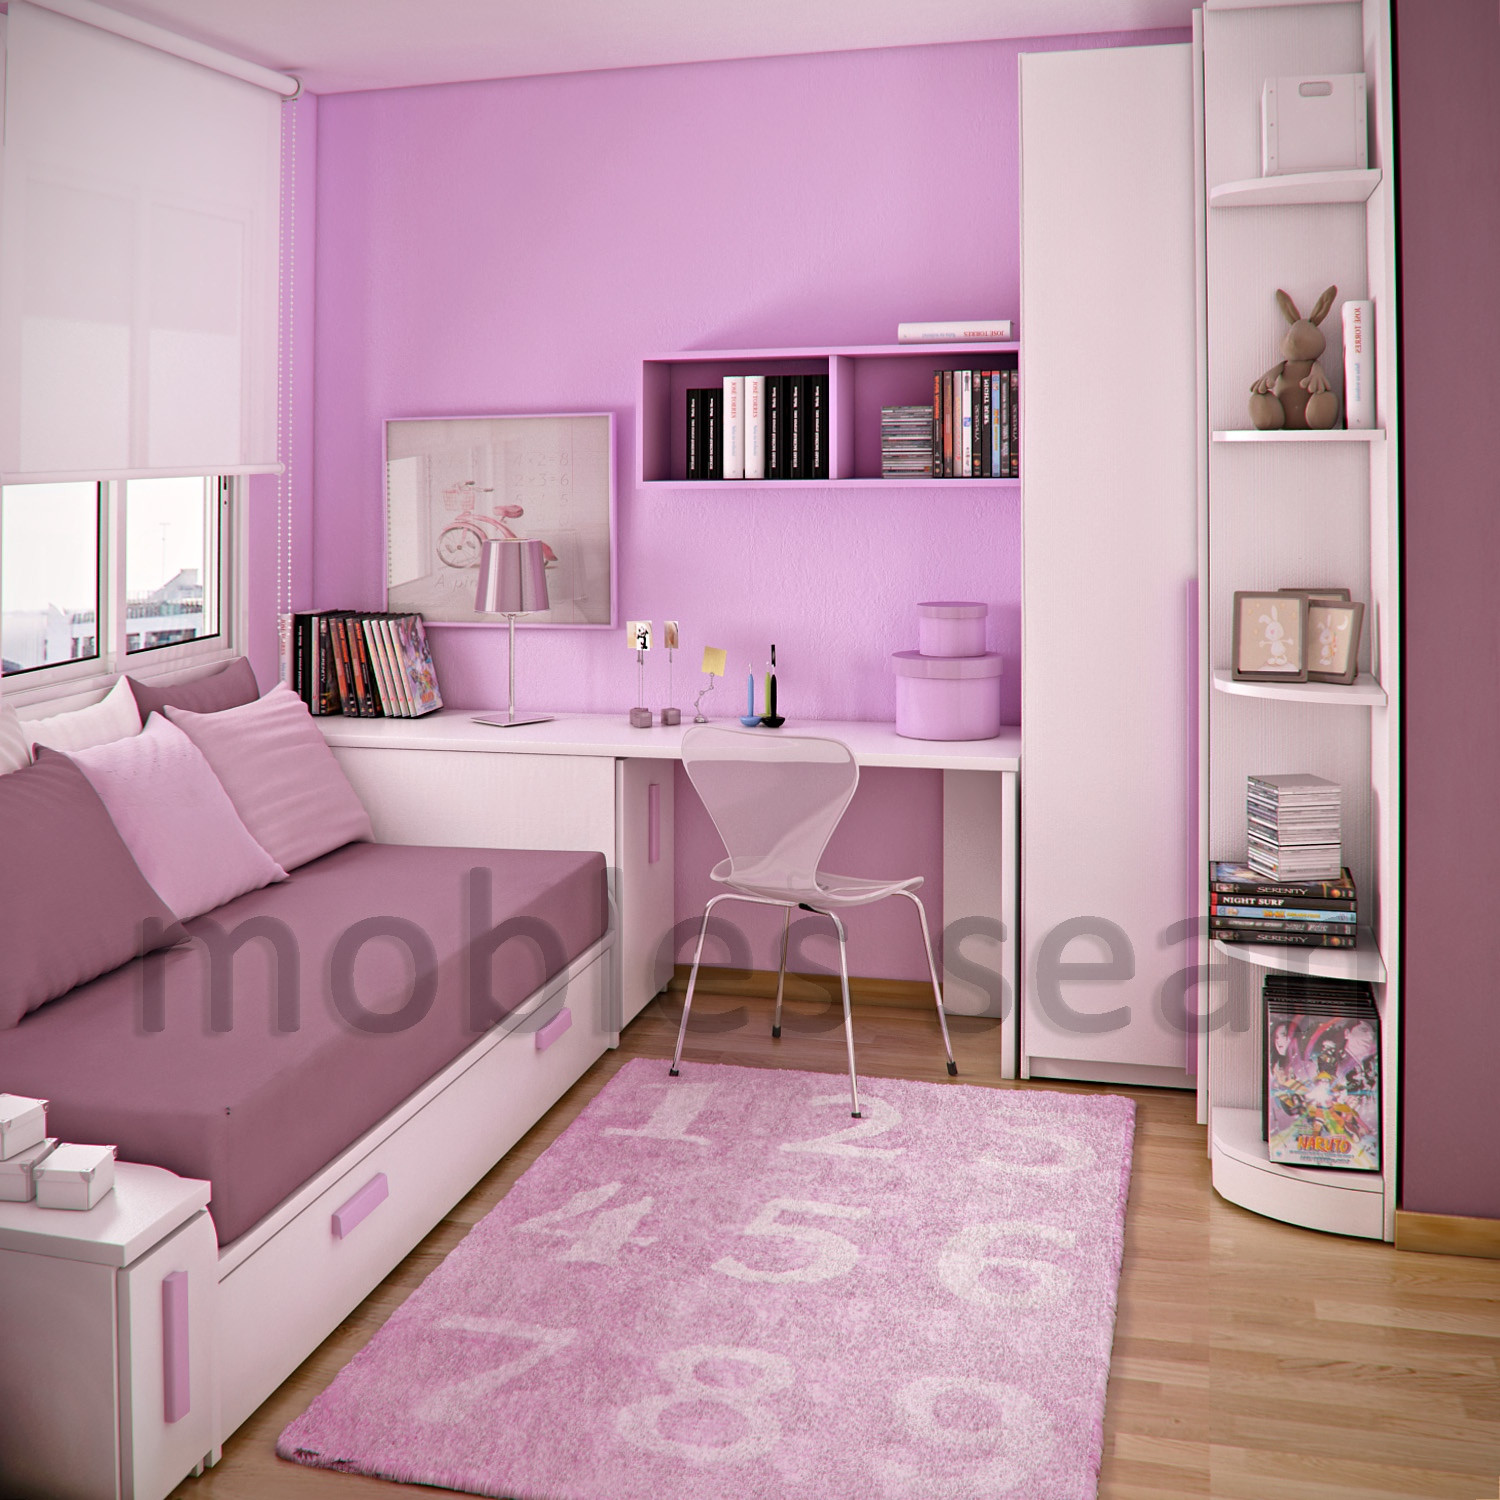 Small Kids Bedroom
 Space Saving Designs for Small Kids Rooms